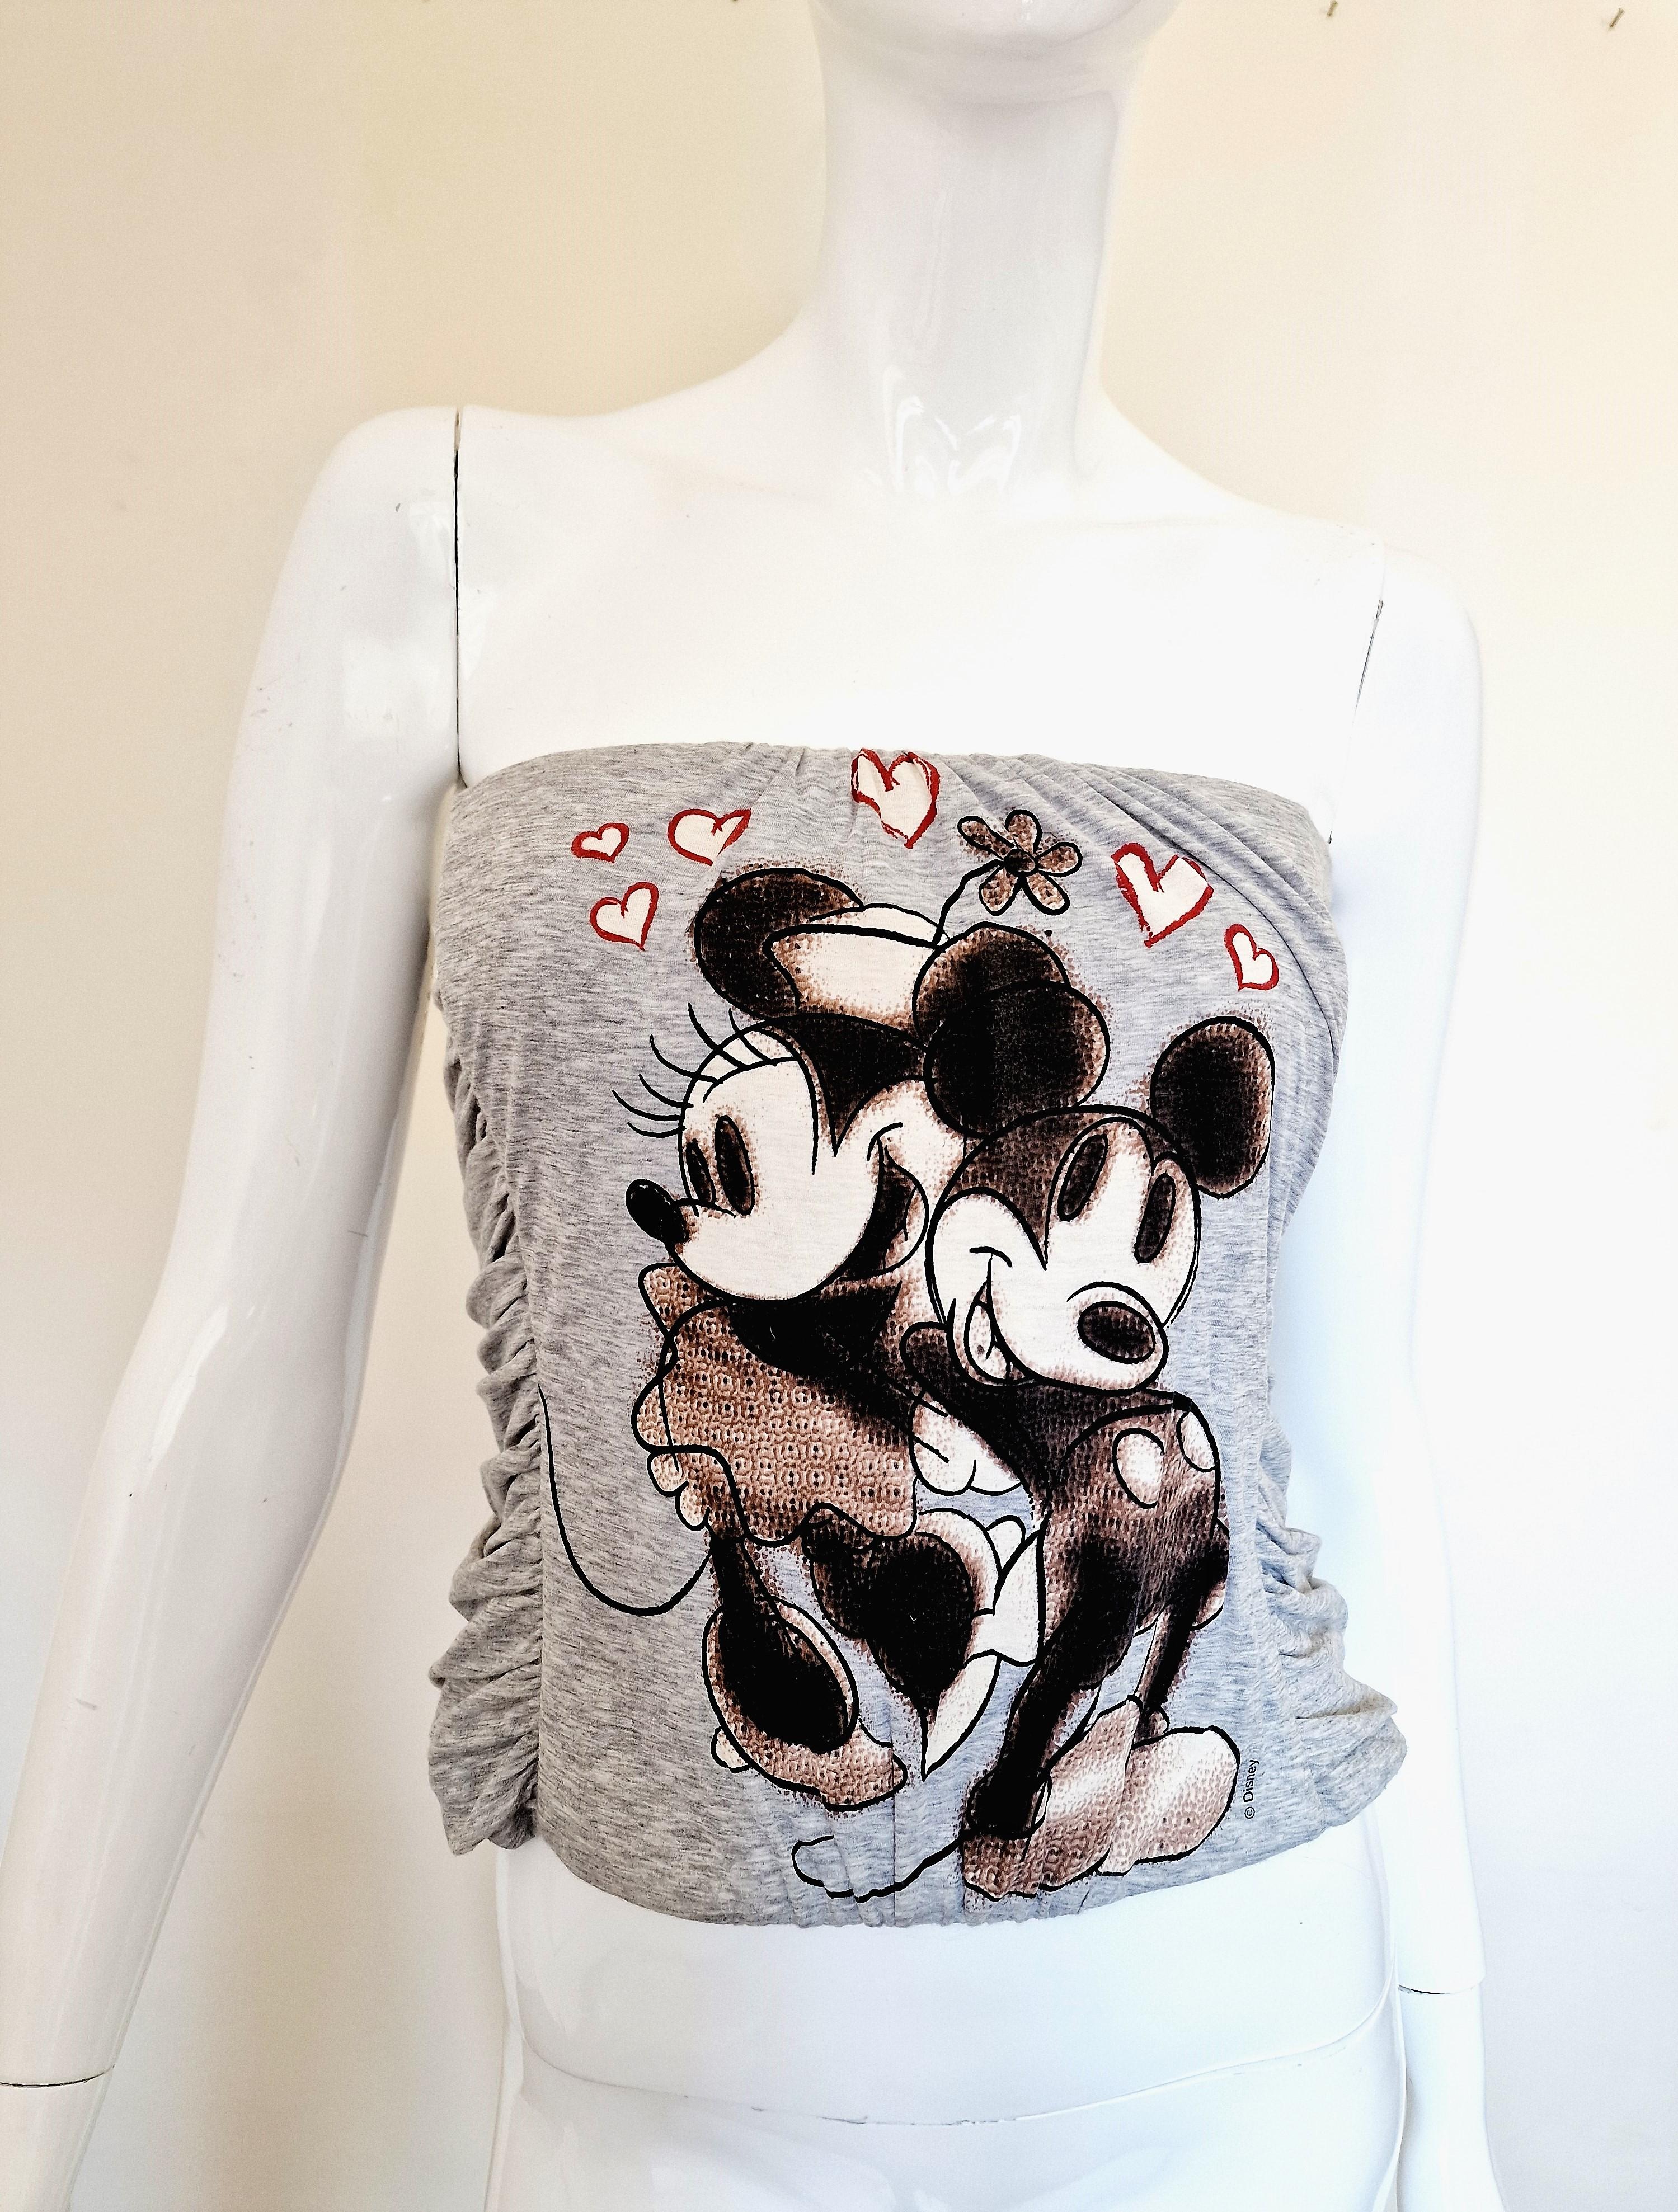 D&G Dolce and Gabbana Minnie & Mickey Mouse Disney Bustier Top Boned Corset In Excellent Condition For Sale In PARIS, FR